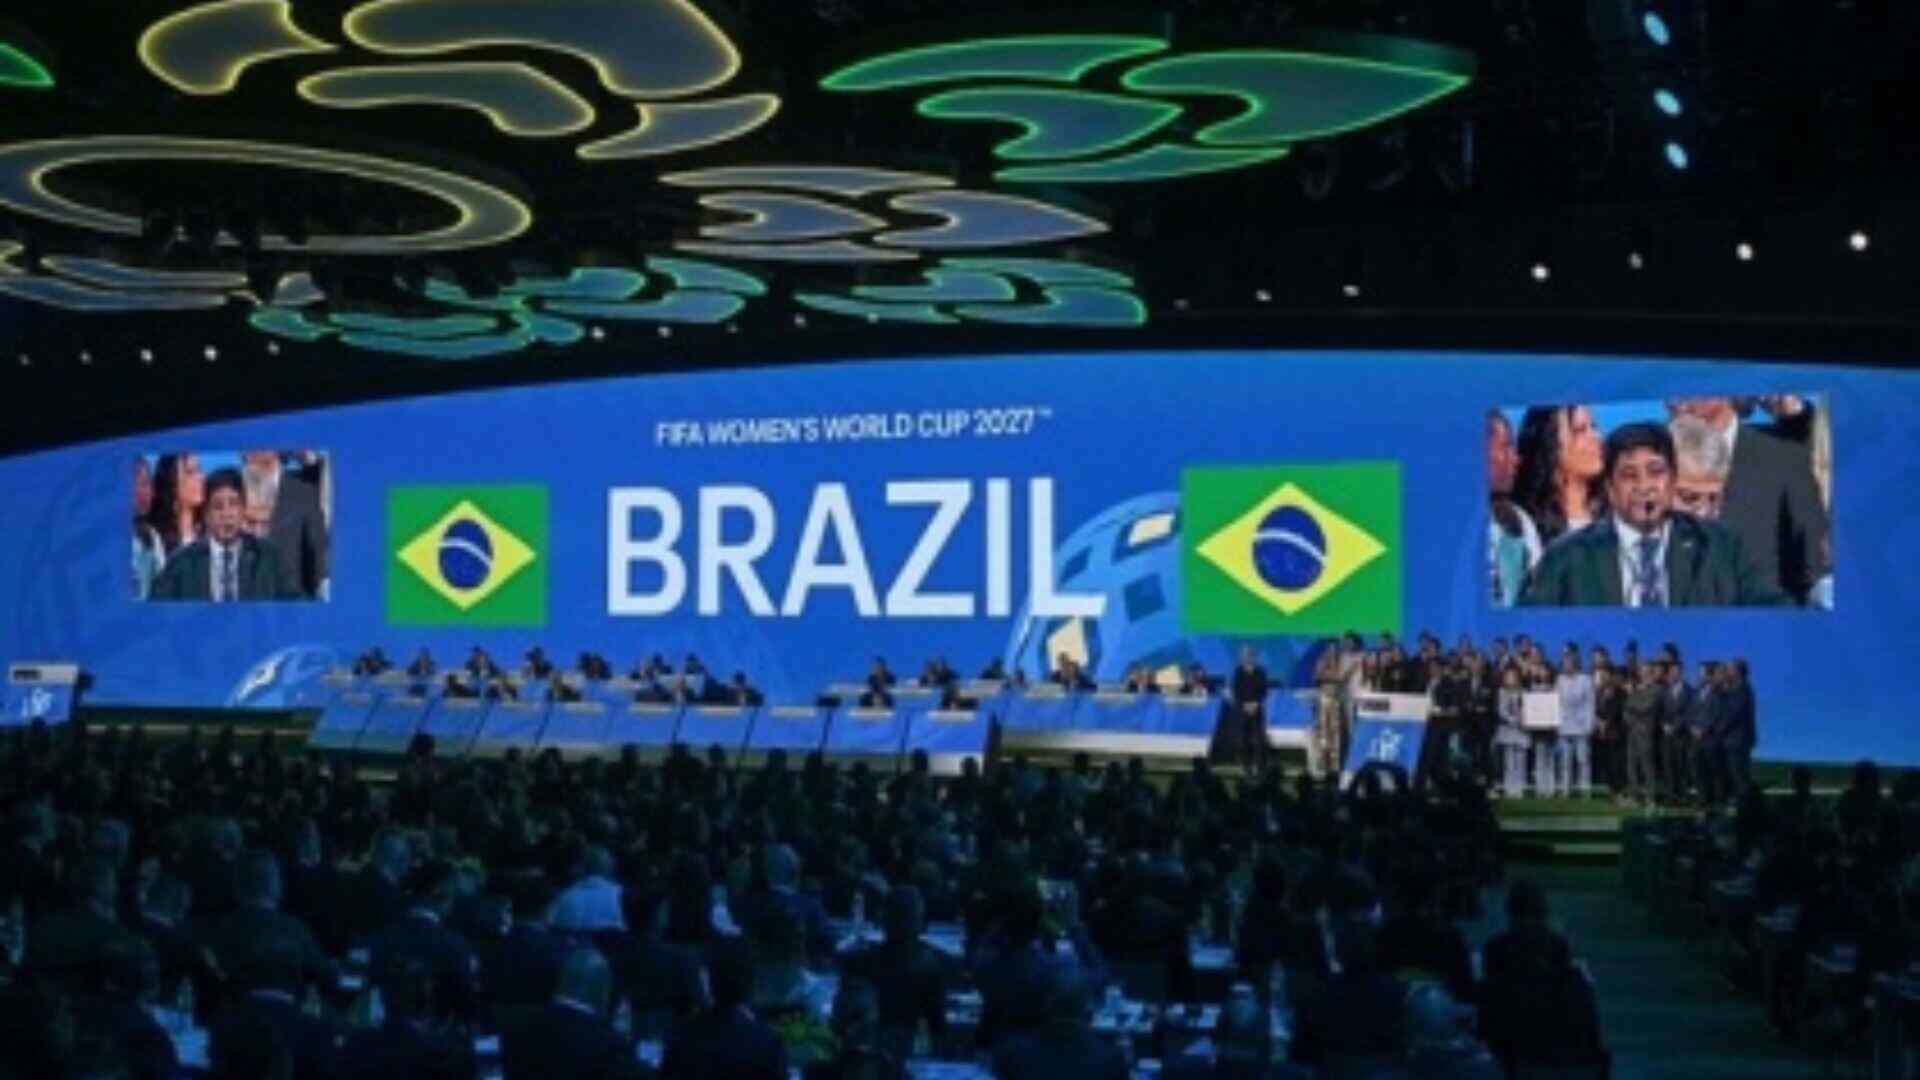 Brazil To Host FIFA Women’s World Cup 2027